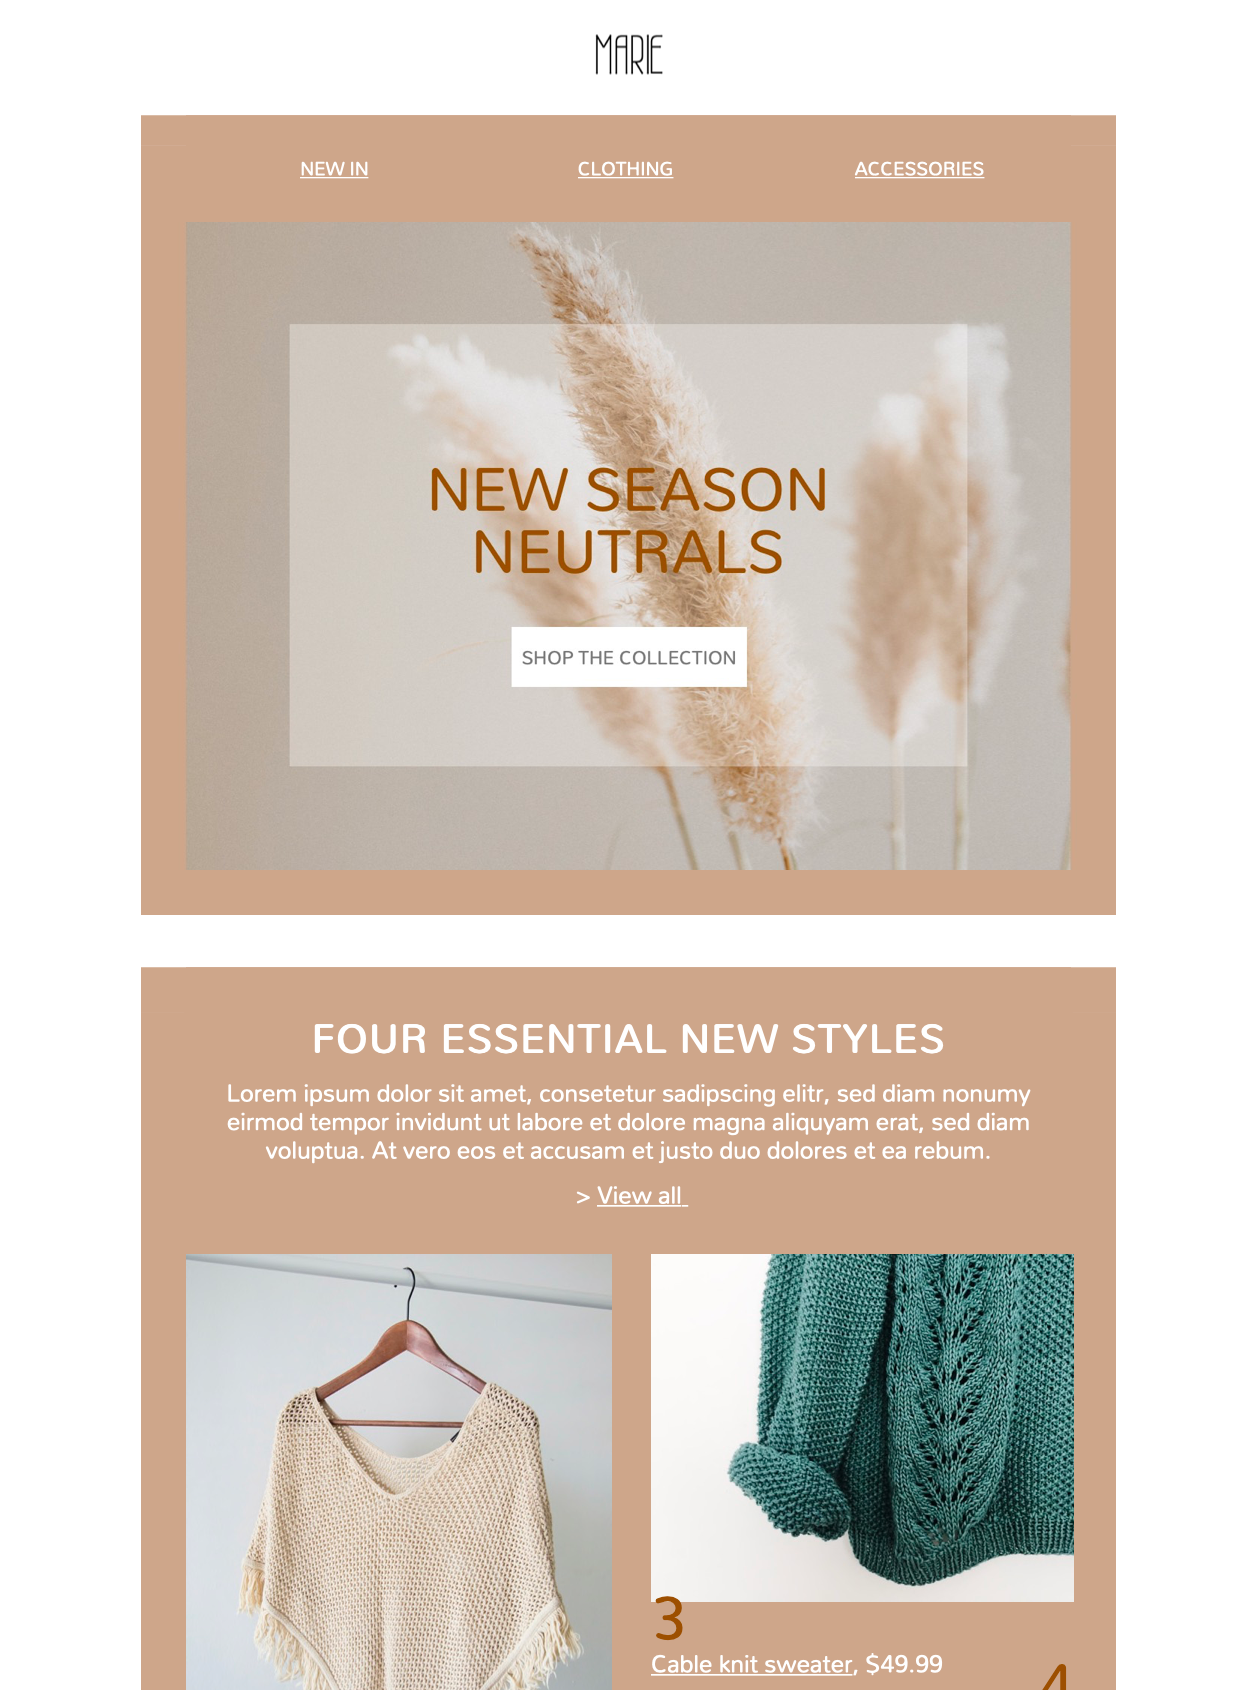 html email template for a fashion promotion